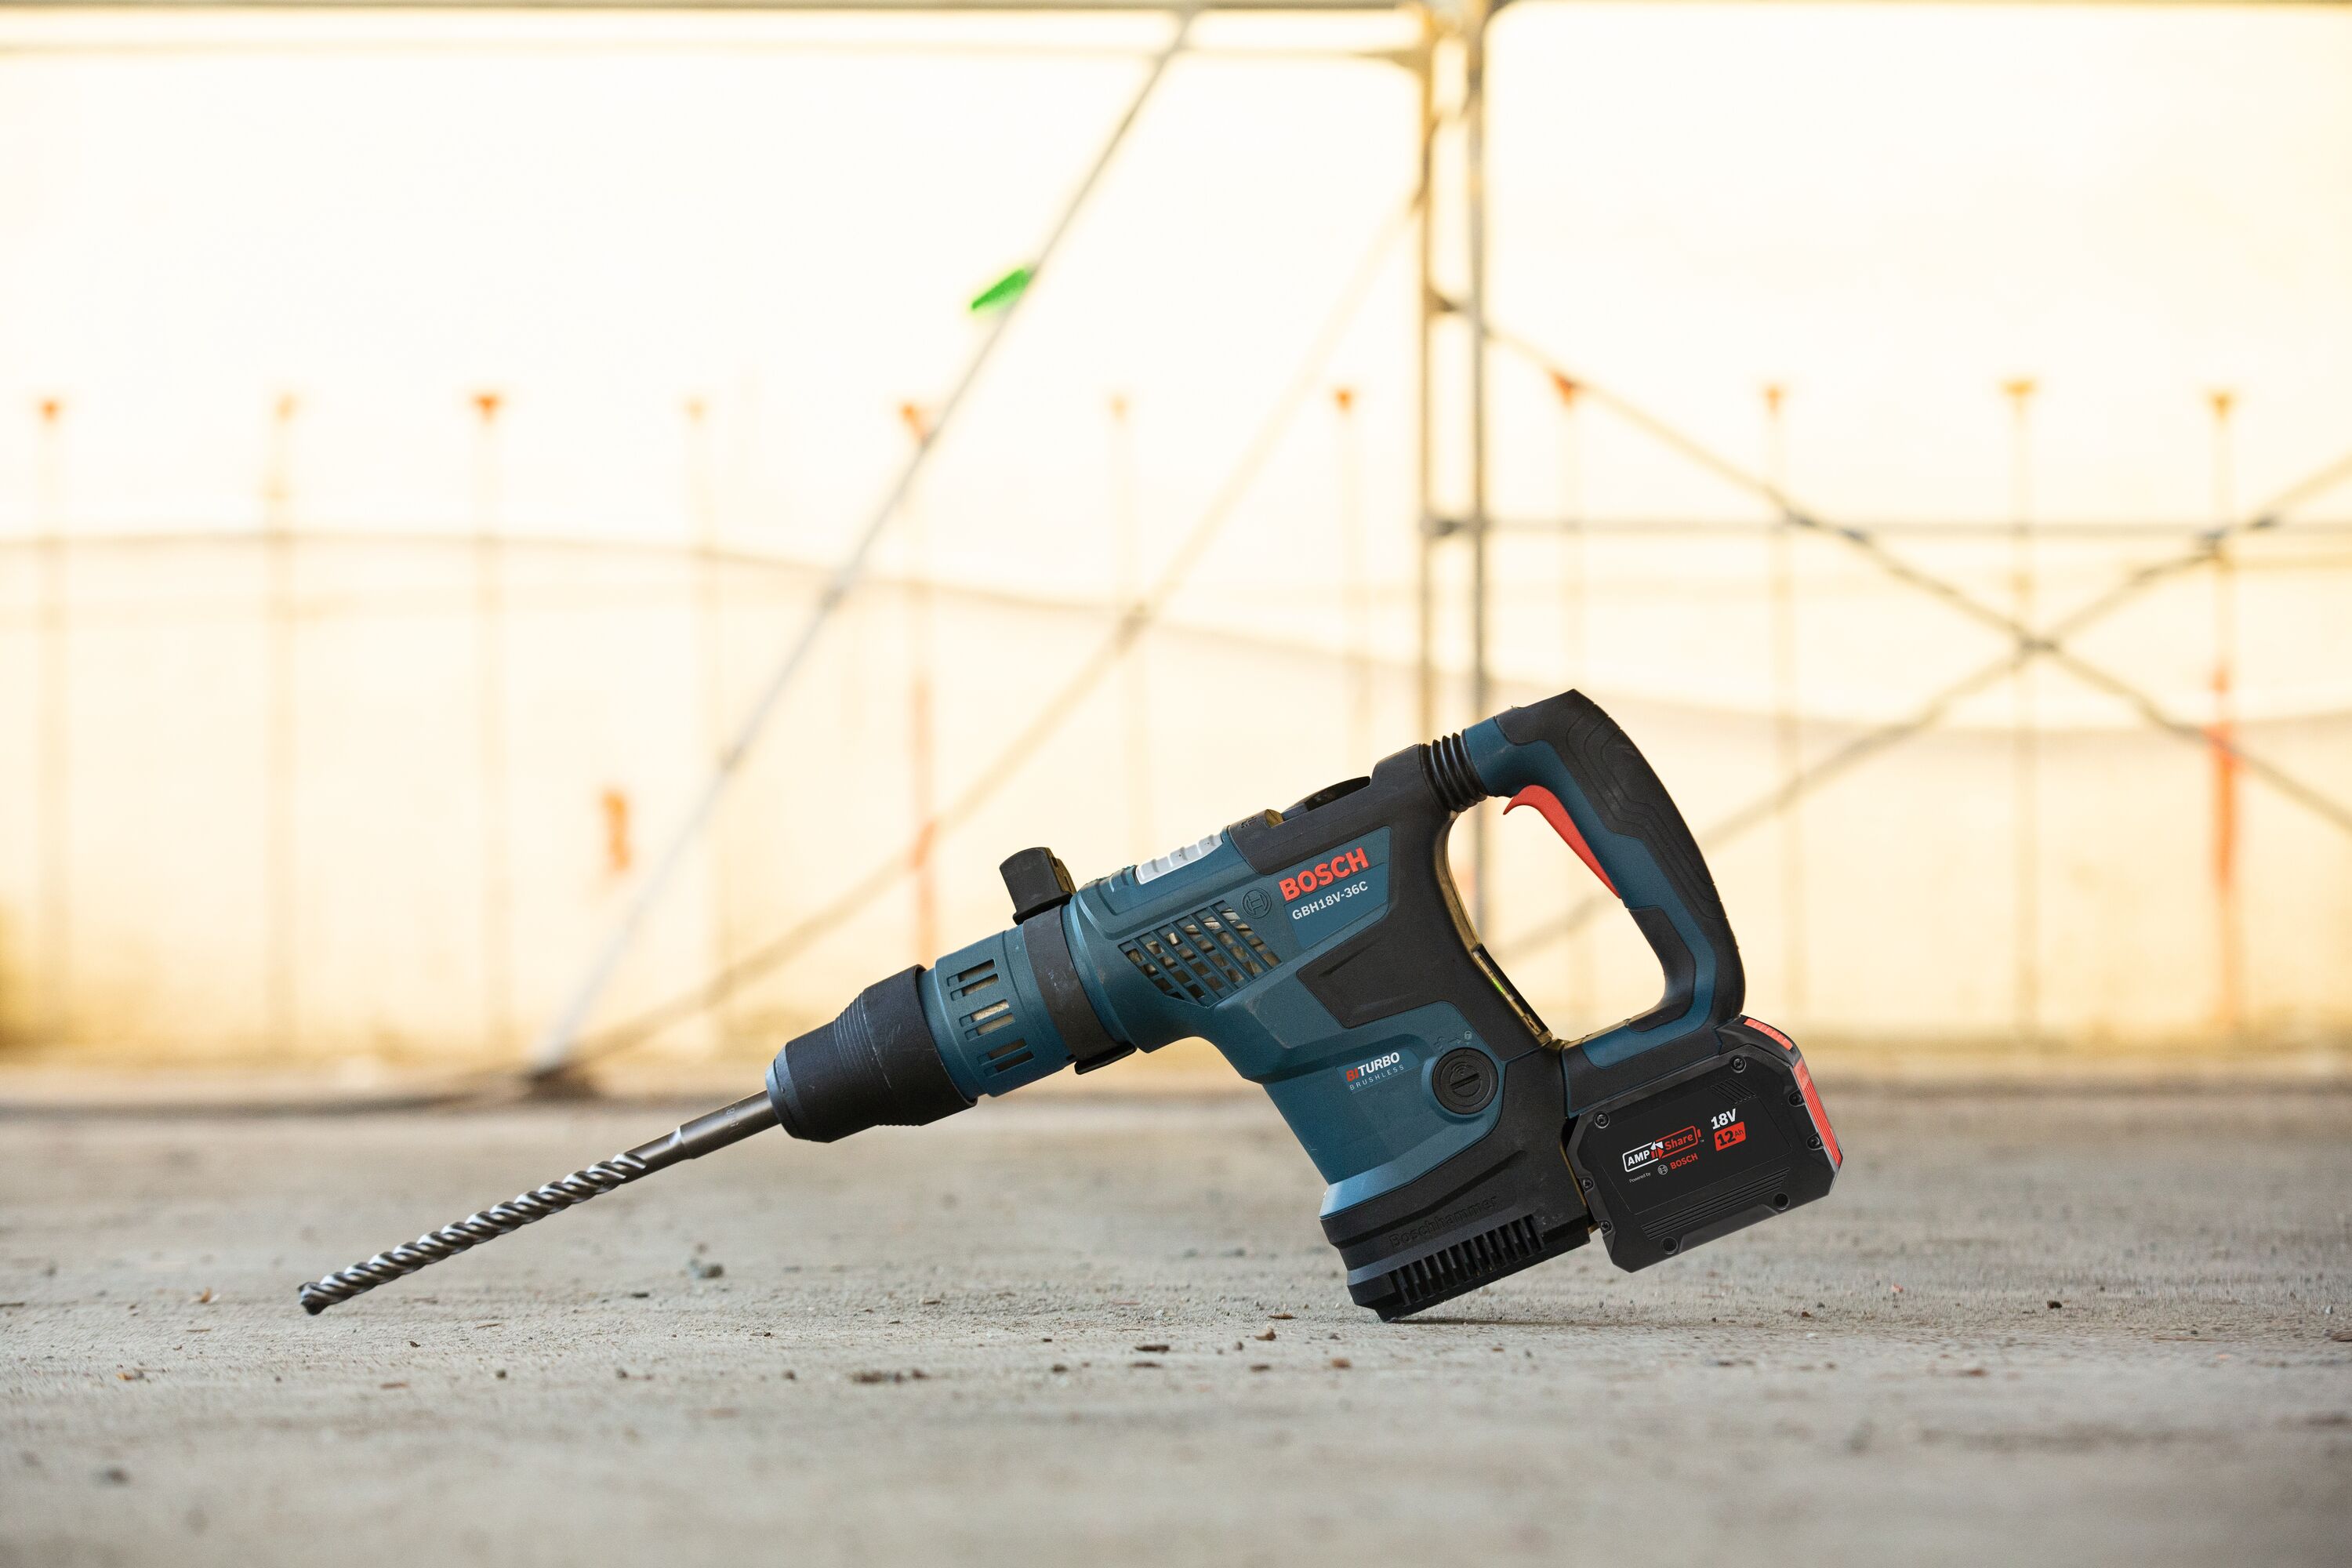 Rotary Speed in Rotary Hammer department Hammer 1-9/16-in Tool) the 18-volt Variable PROFACTOR Drill (Bare at Drills Cordless Sds-max 8-Amp Bosch